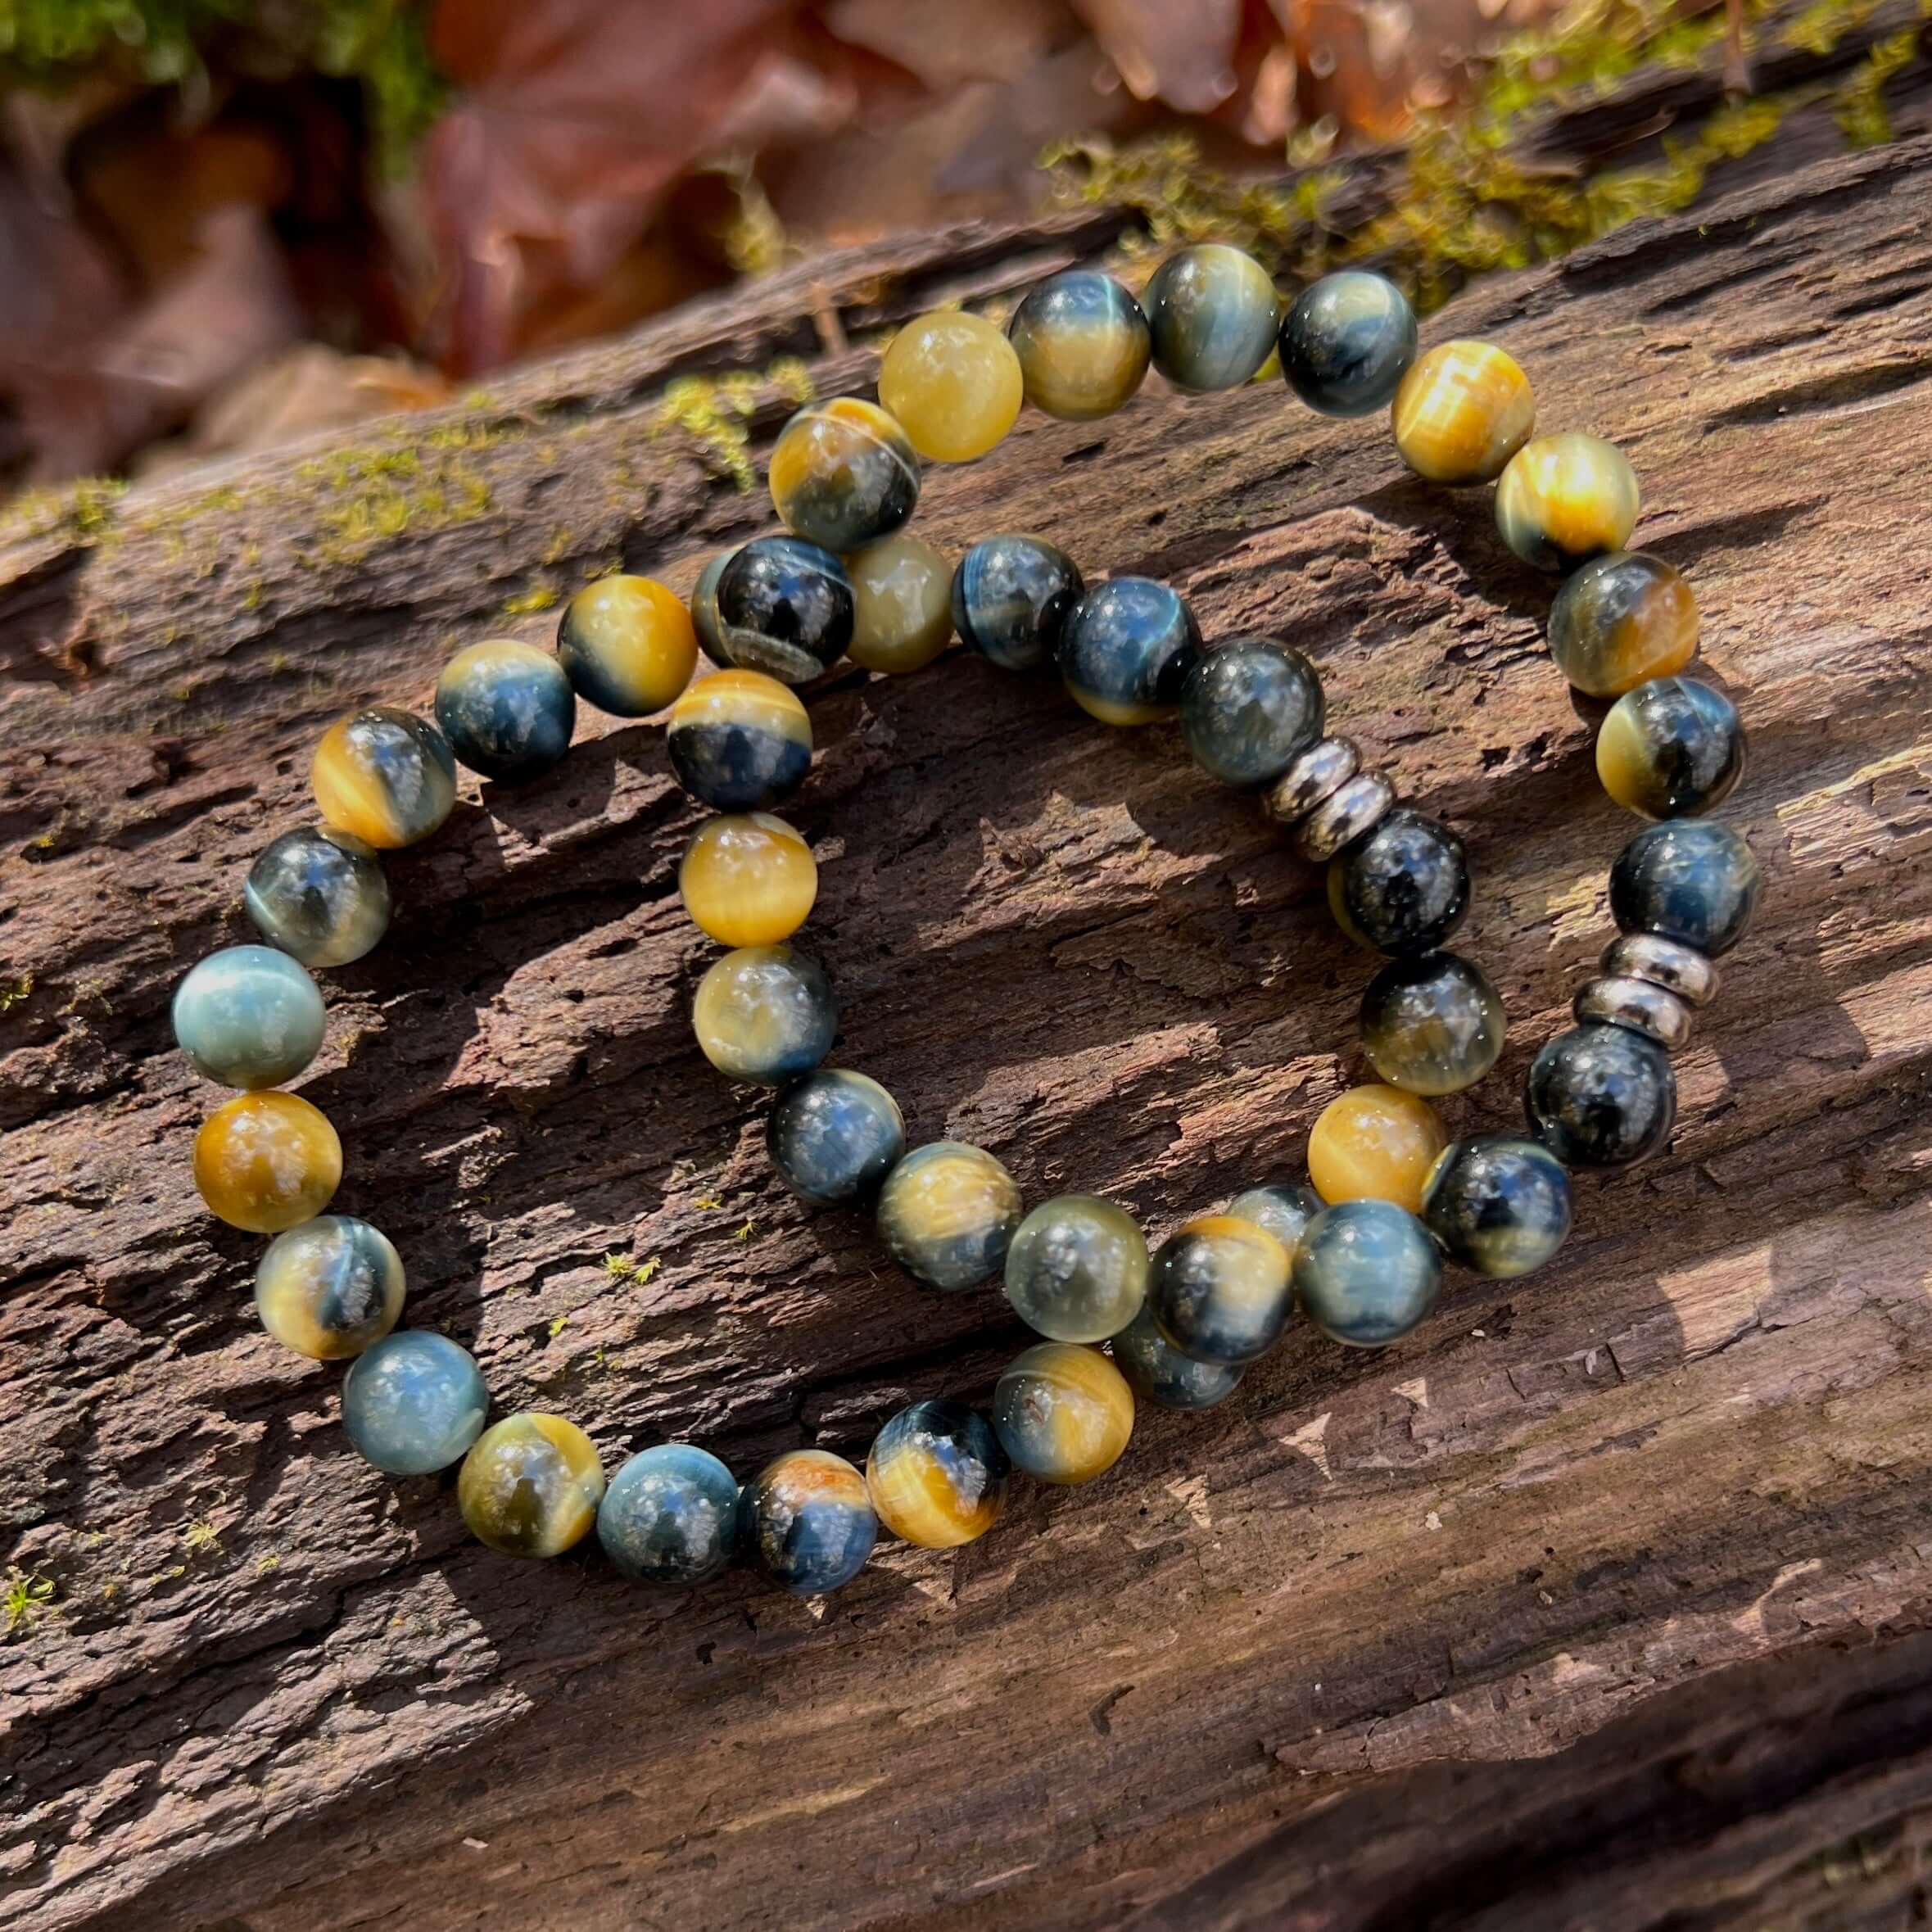 Blue and Blonde Tiger Eye Bead Bracelet This bracelet is made with high-quality Blue and Blonde Tiger Eye stones which bring confidence and optimism to the wearer. Zodiac Signs: Leo and Capricorn. Chakras: Root and Solar Plexus. Handmade with authentic cr